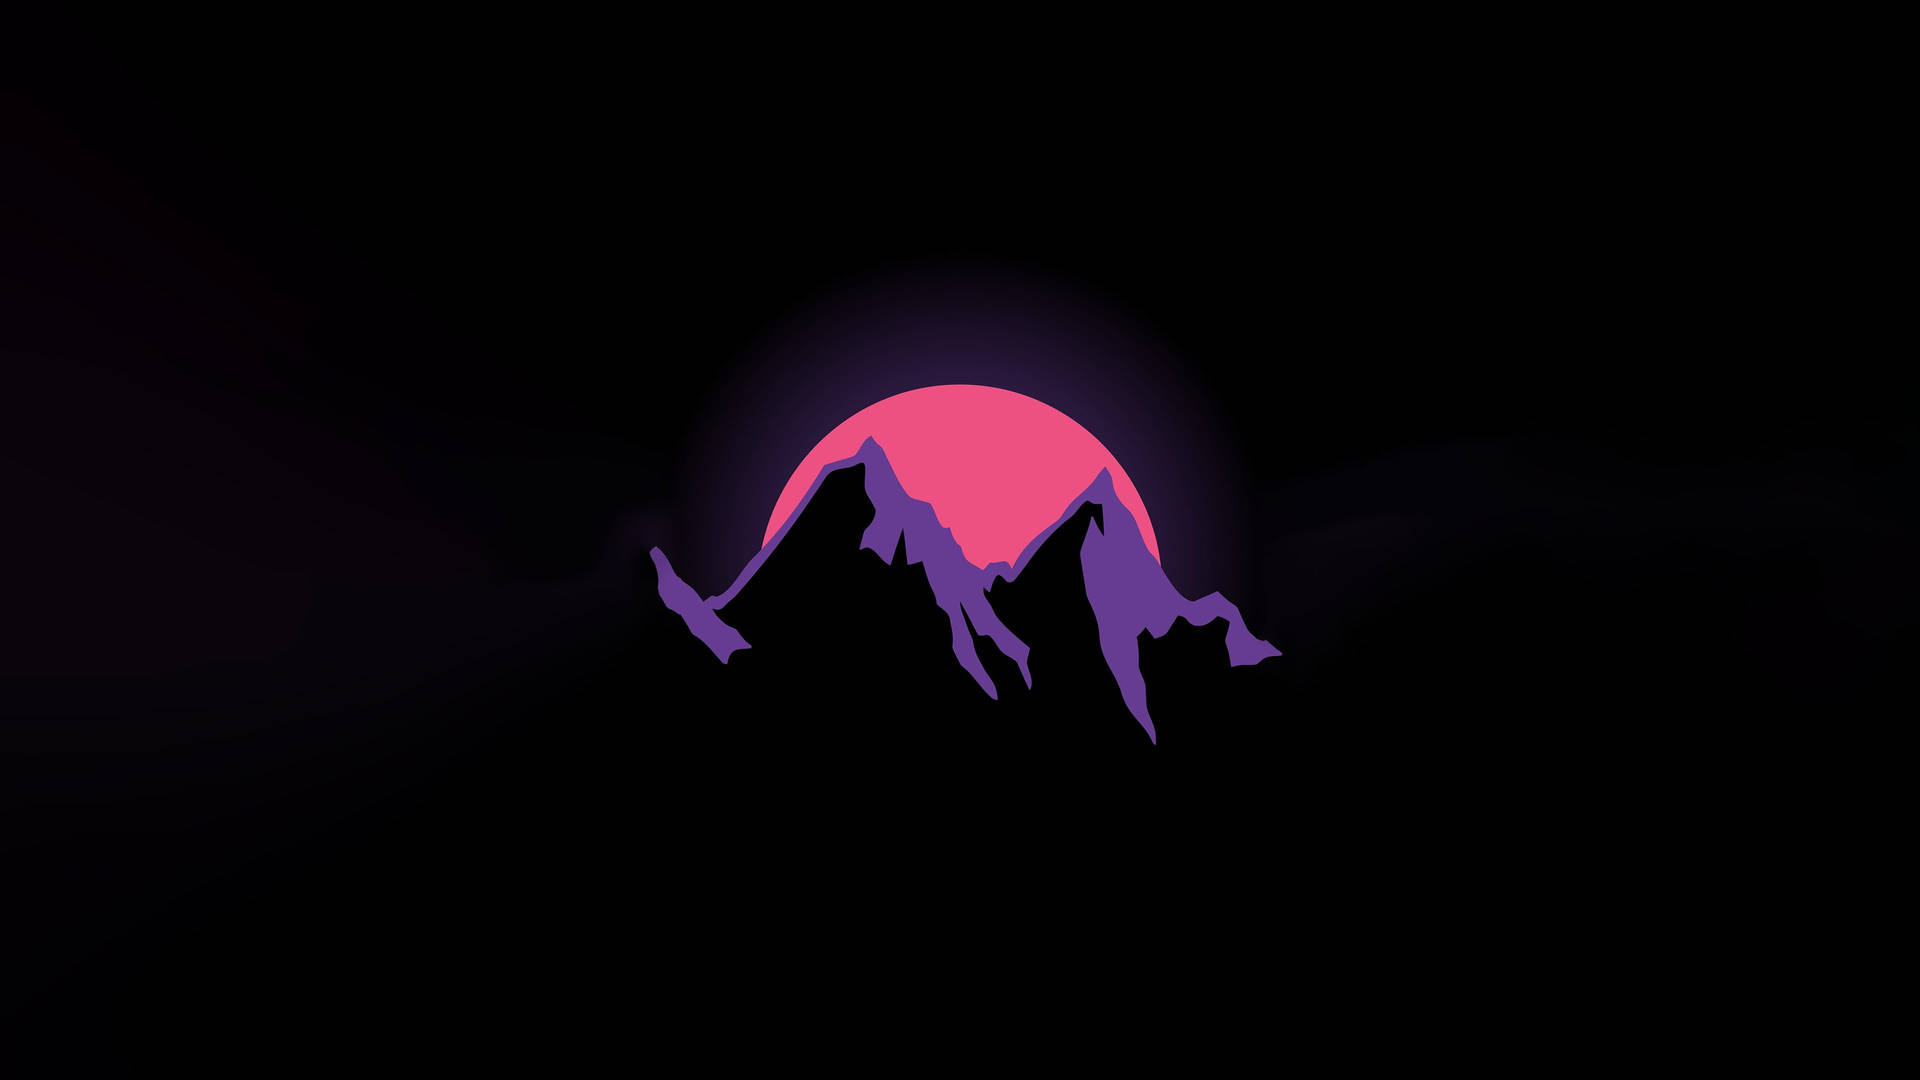 Dark Abstract Of Mountain Silhouette